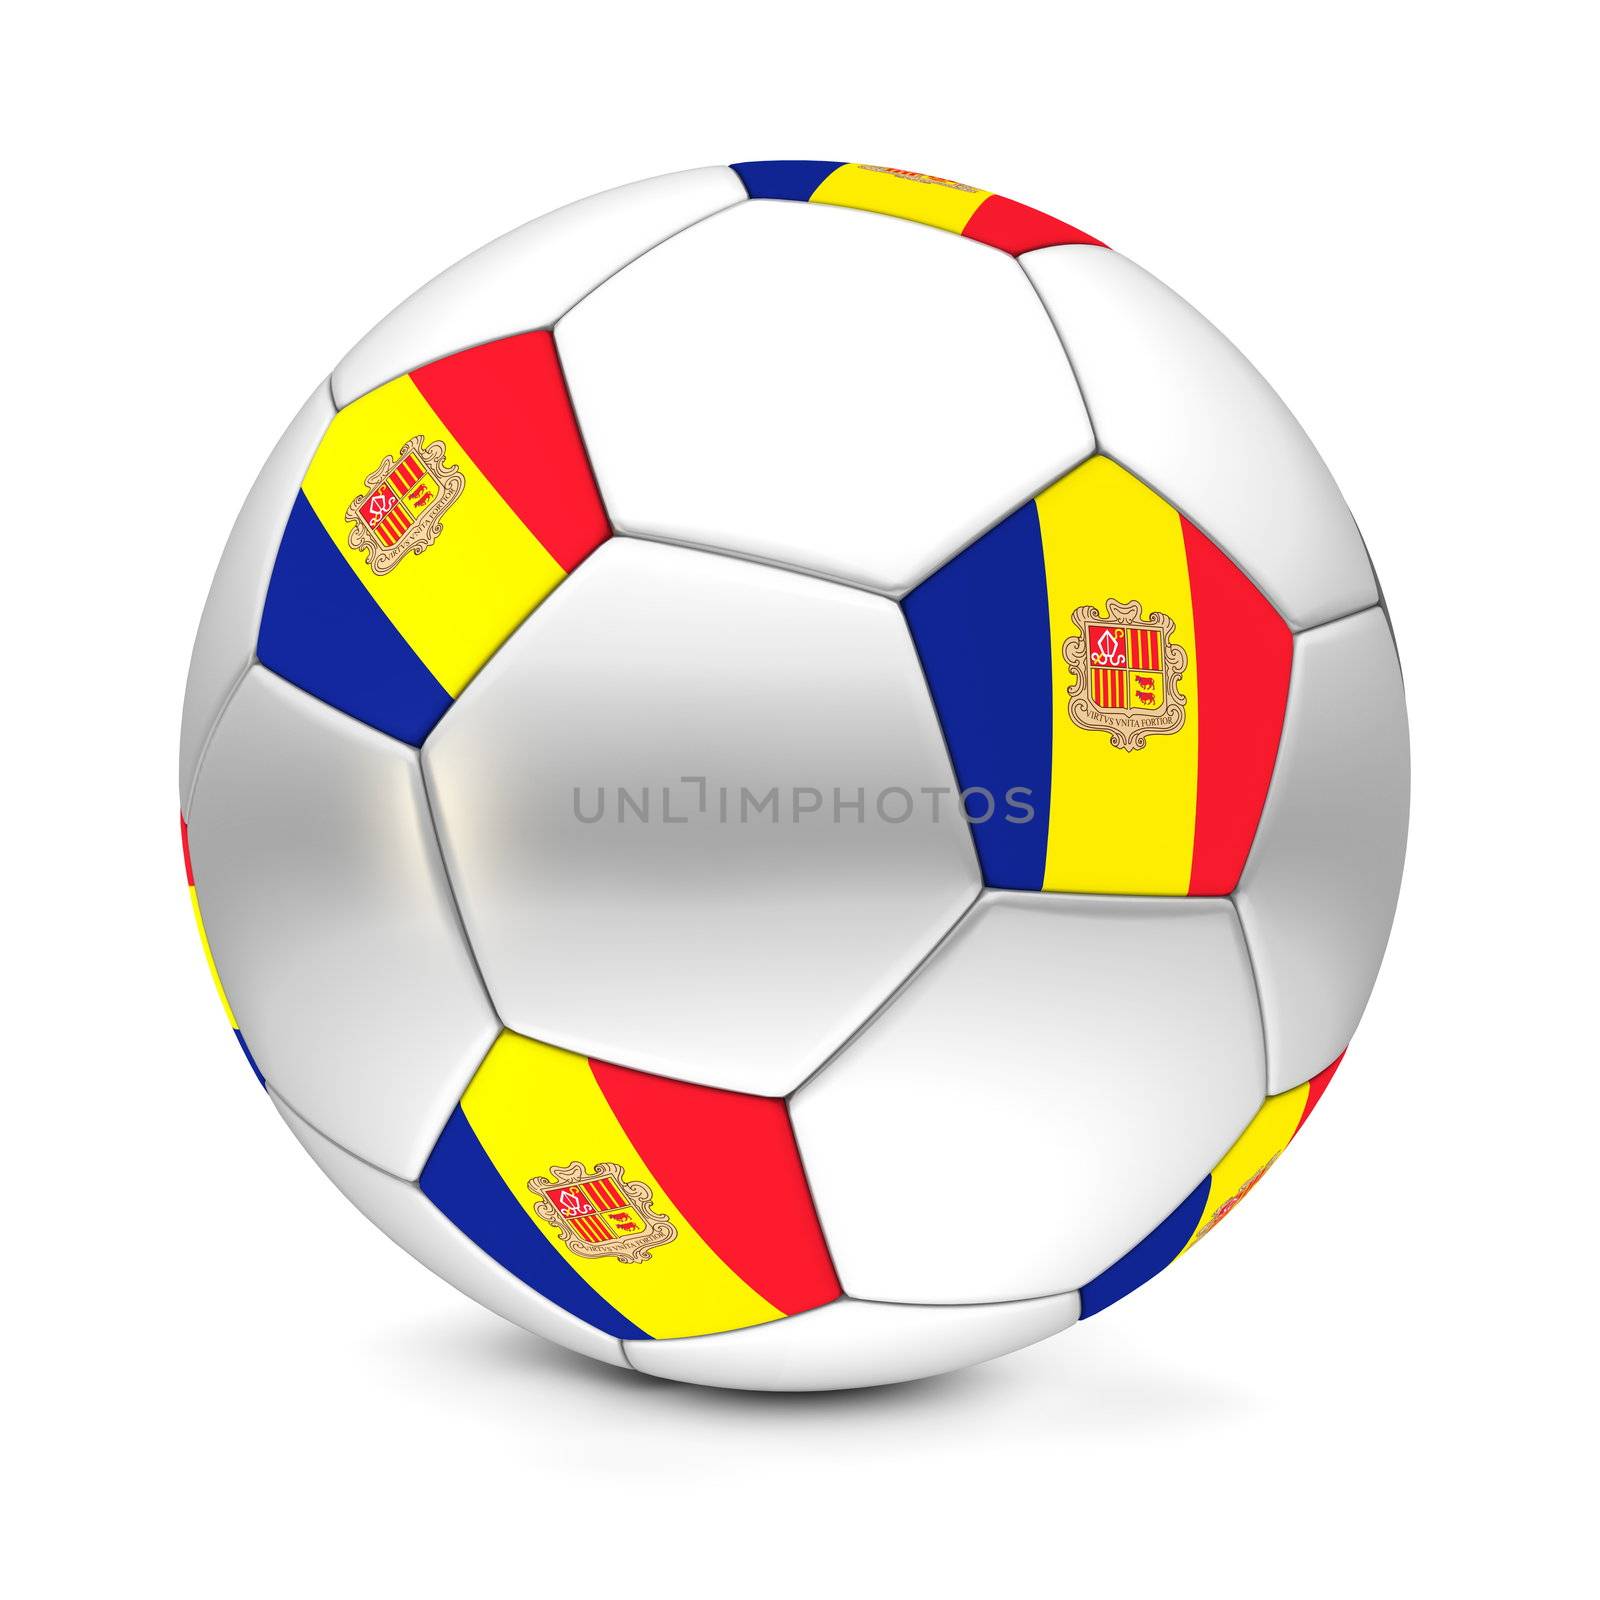 shiny football/soccer ball with the flag of Andorra on the pentagons